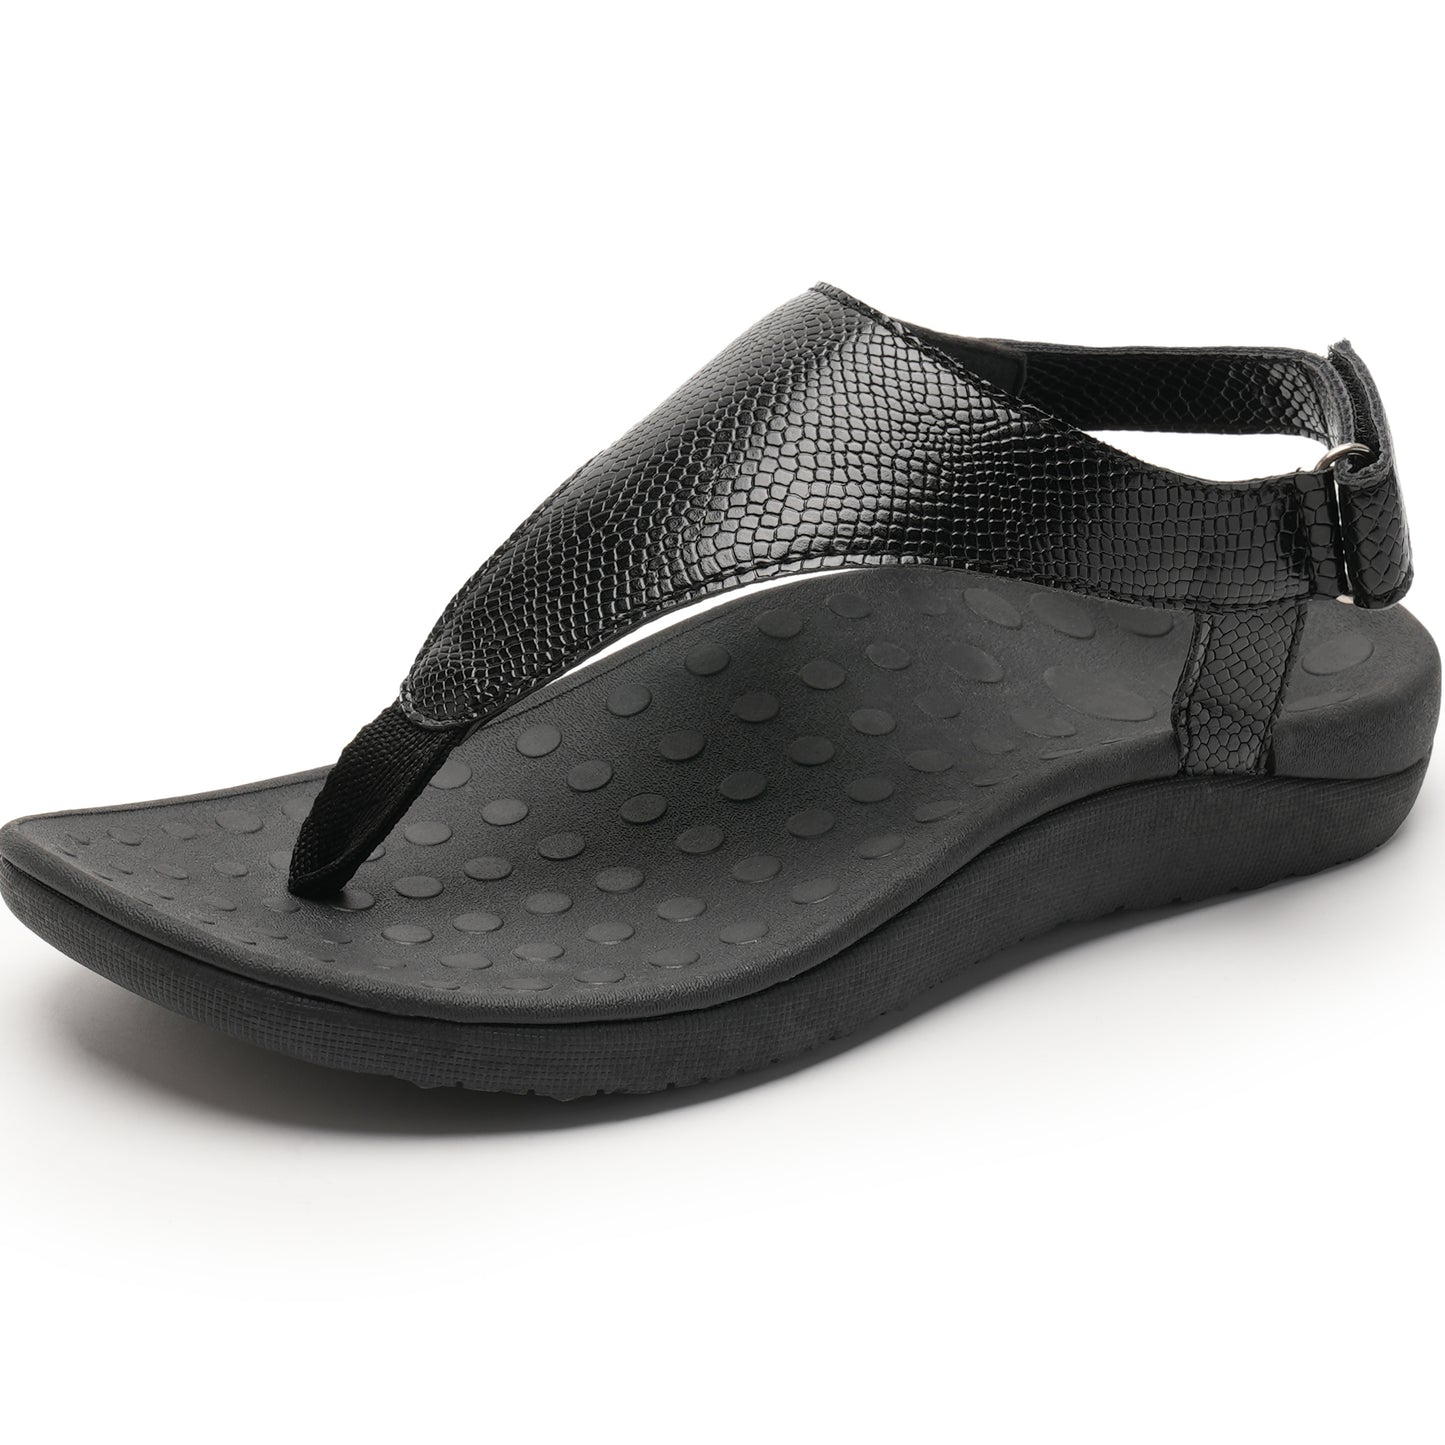 Women's Simple Wedge Thong Sandals, Casual Hook & Loop Strap Sandals, Comfortable Outdoor Shoes